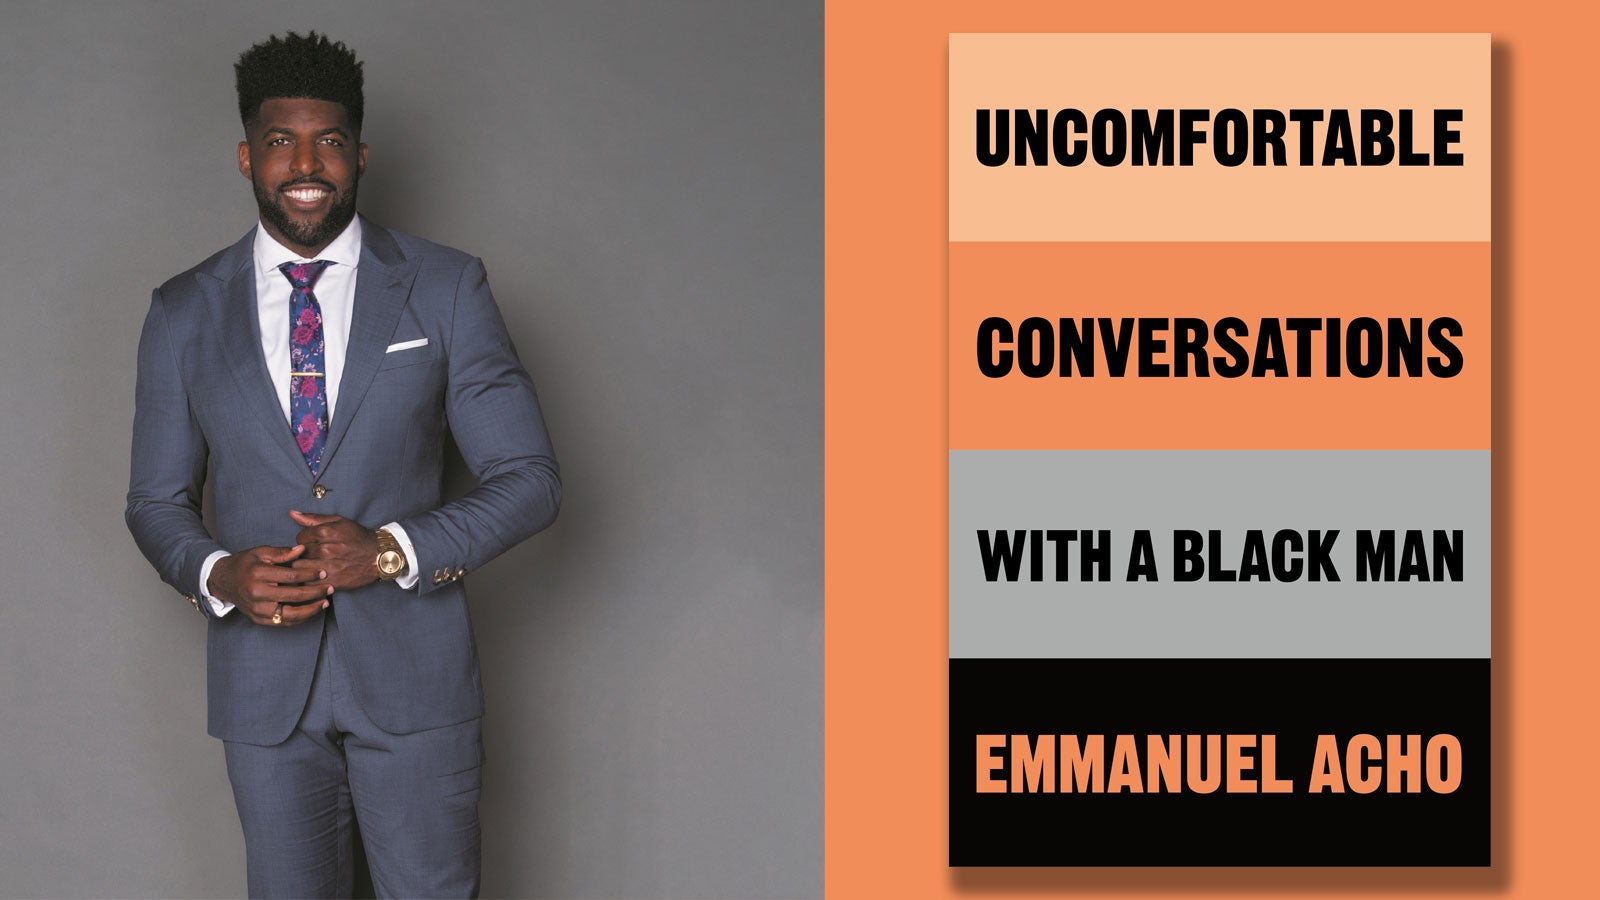 Emmanuel Acho and the Uncomfortable Conversations with a Black Man book cover